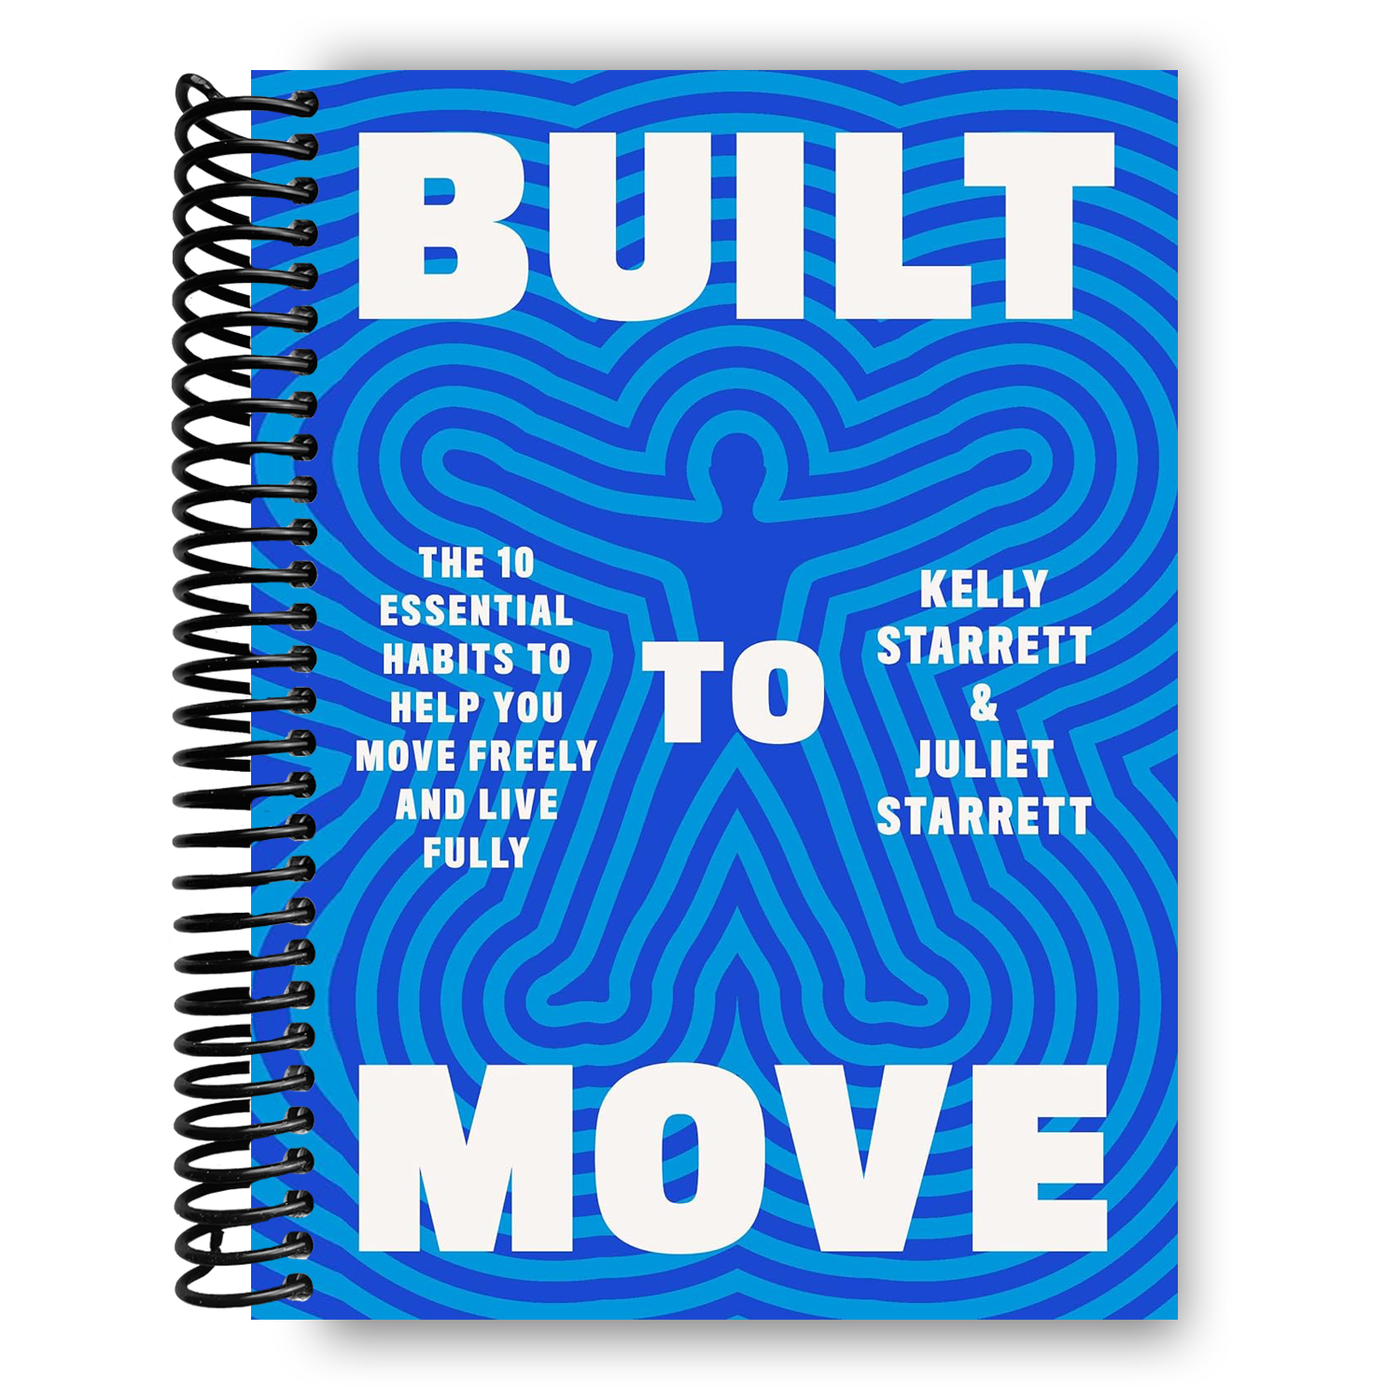 Built to Move: The Ten Essential Habits to Help You Move Freely and Live Fully (Spiral Bound)